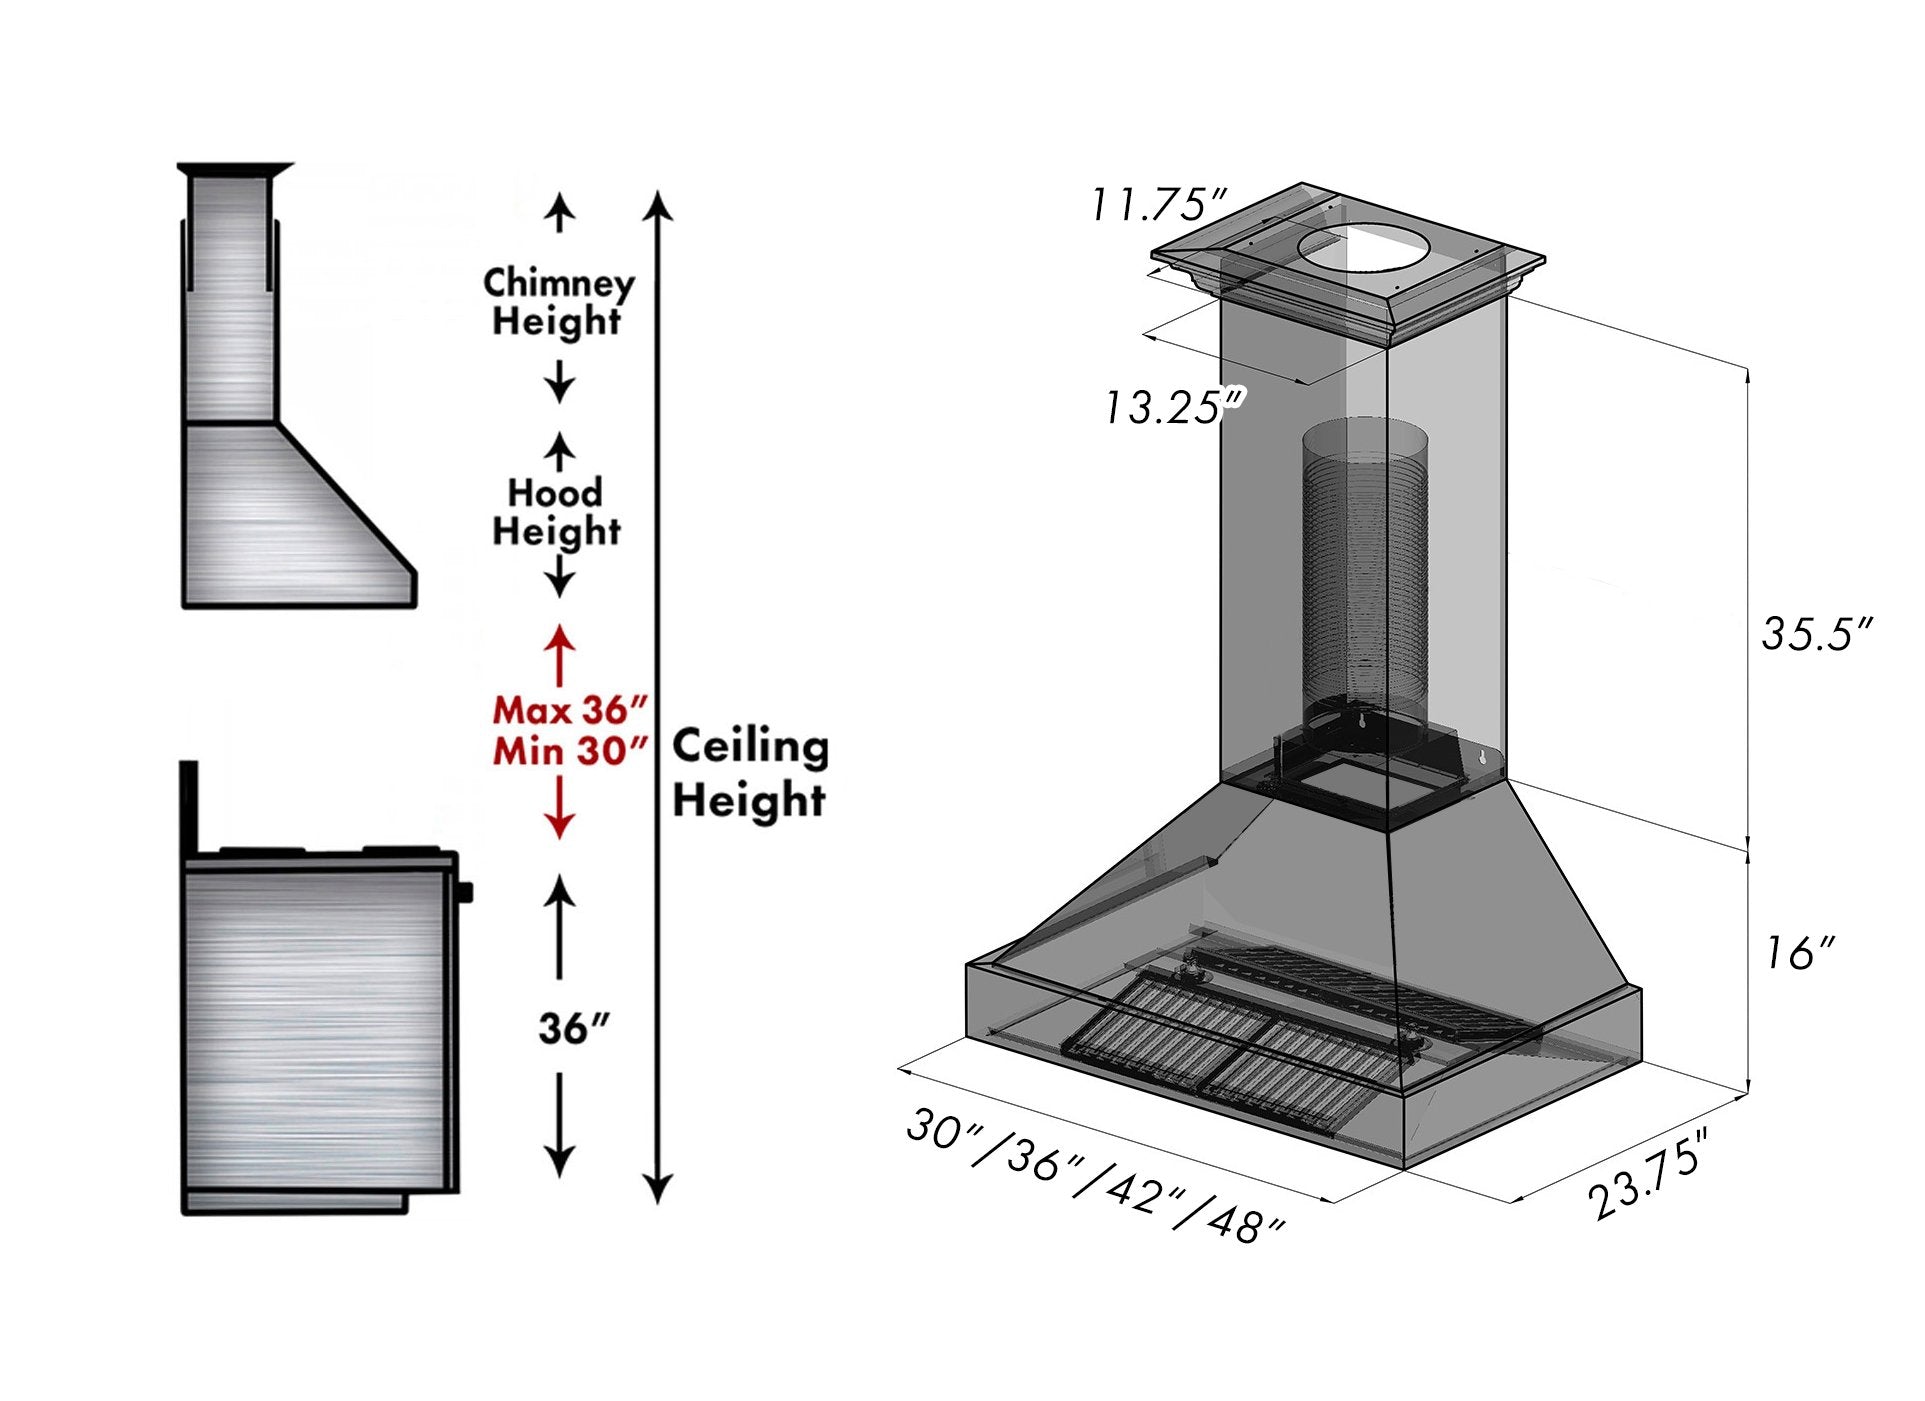 ZLINE Ducted Fingerprint Resistant Stainless Steel Range Hood with Oil Rubbed Bronze Shell (8654ORB) dimensional diagram with measurements.